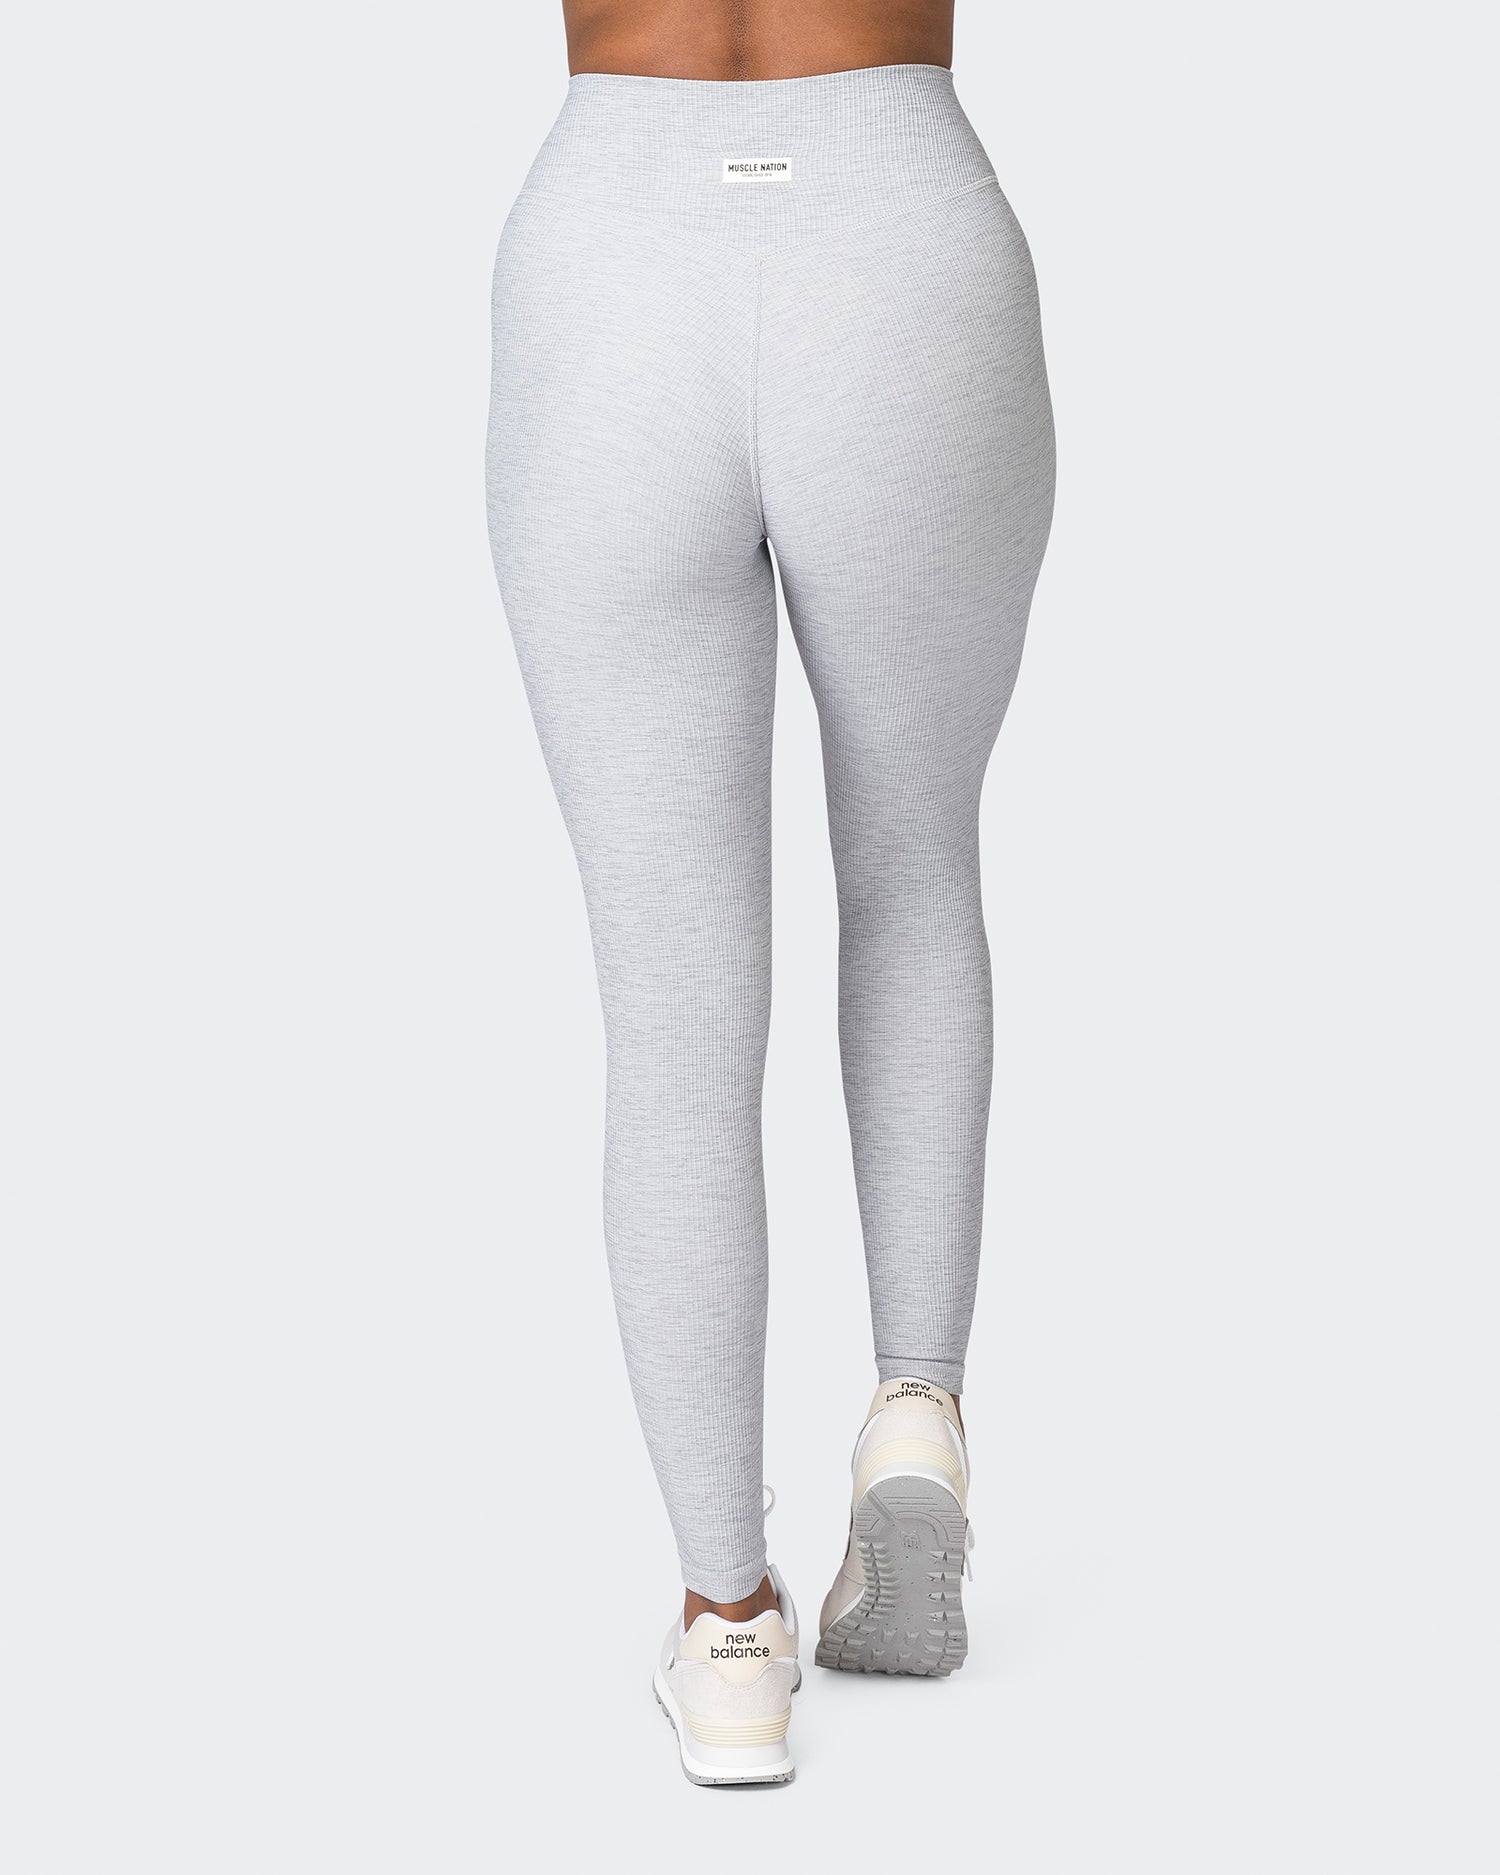 Zero Rise Rib Ankle Length Leggings - Quiet Grey Marl - Muscle Nation